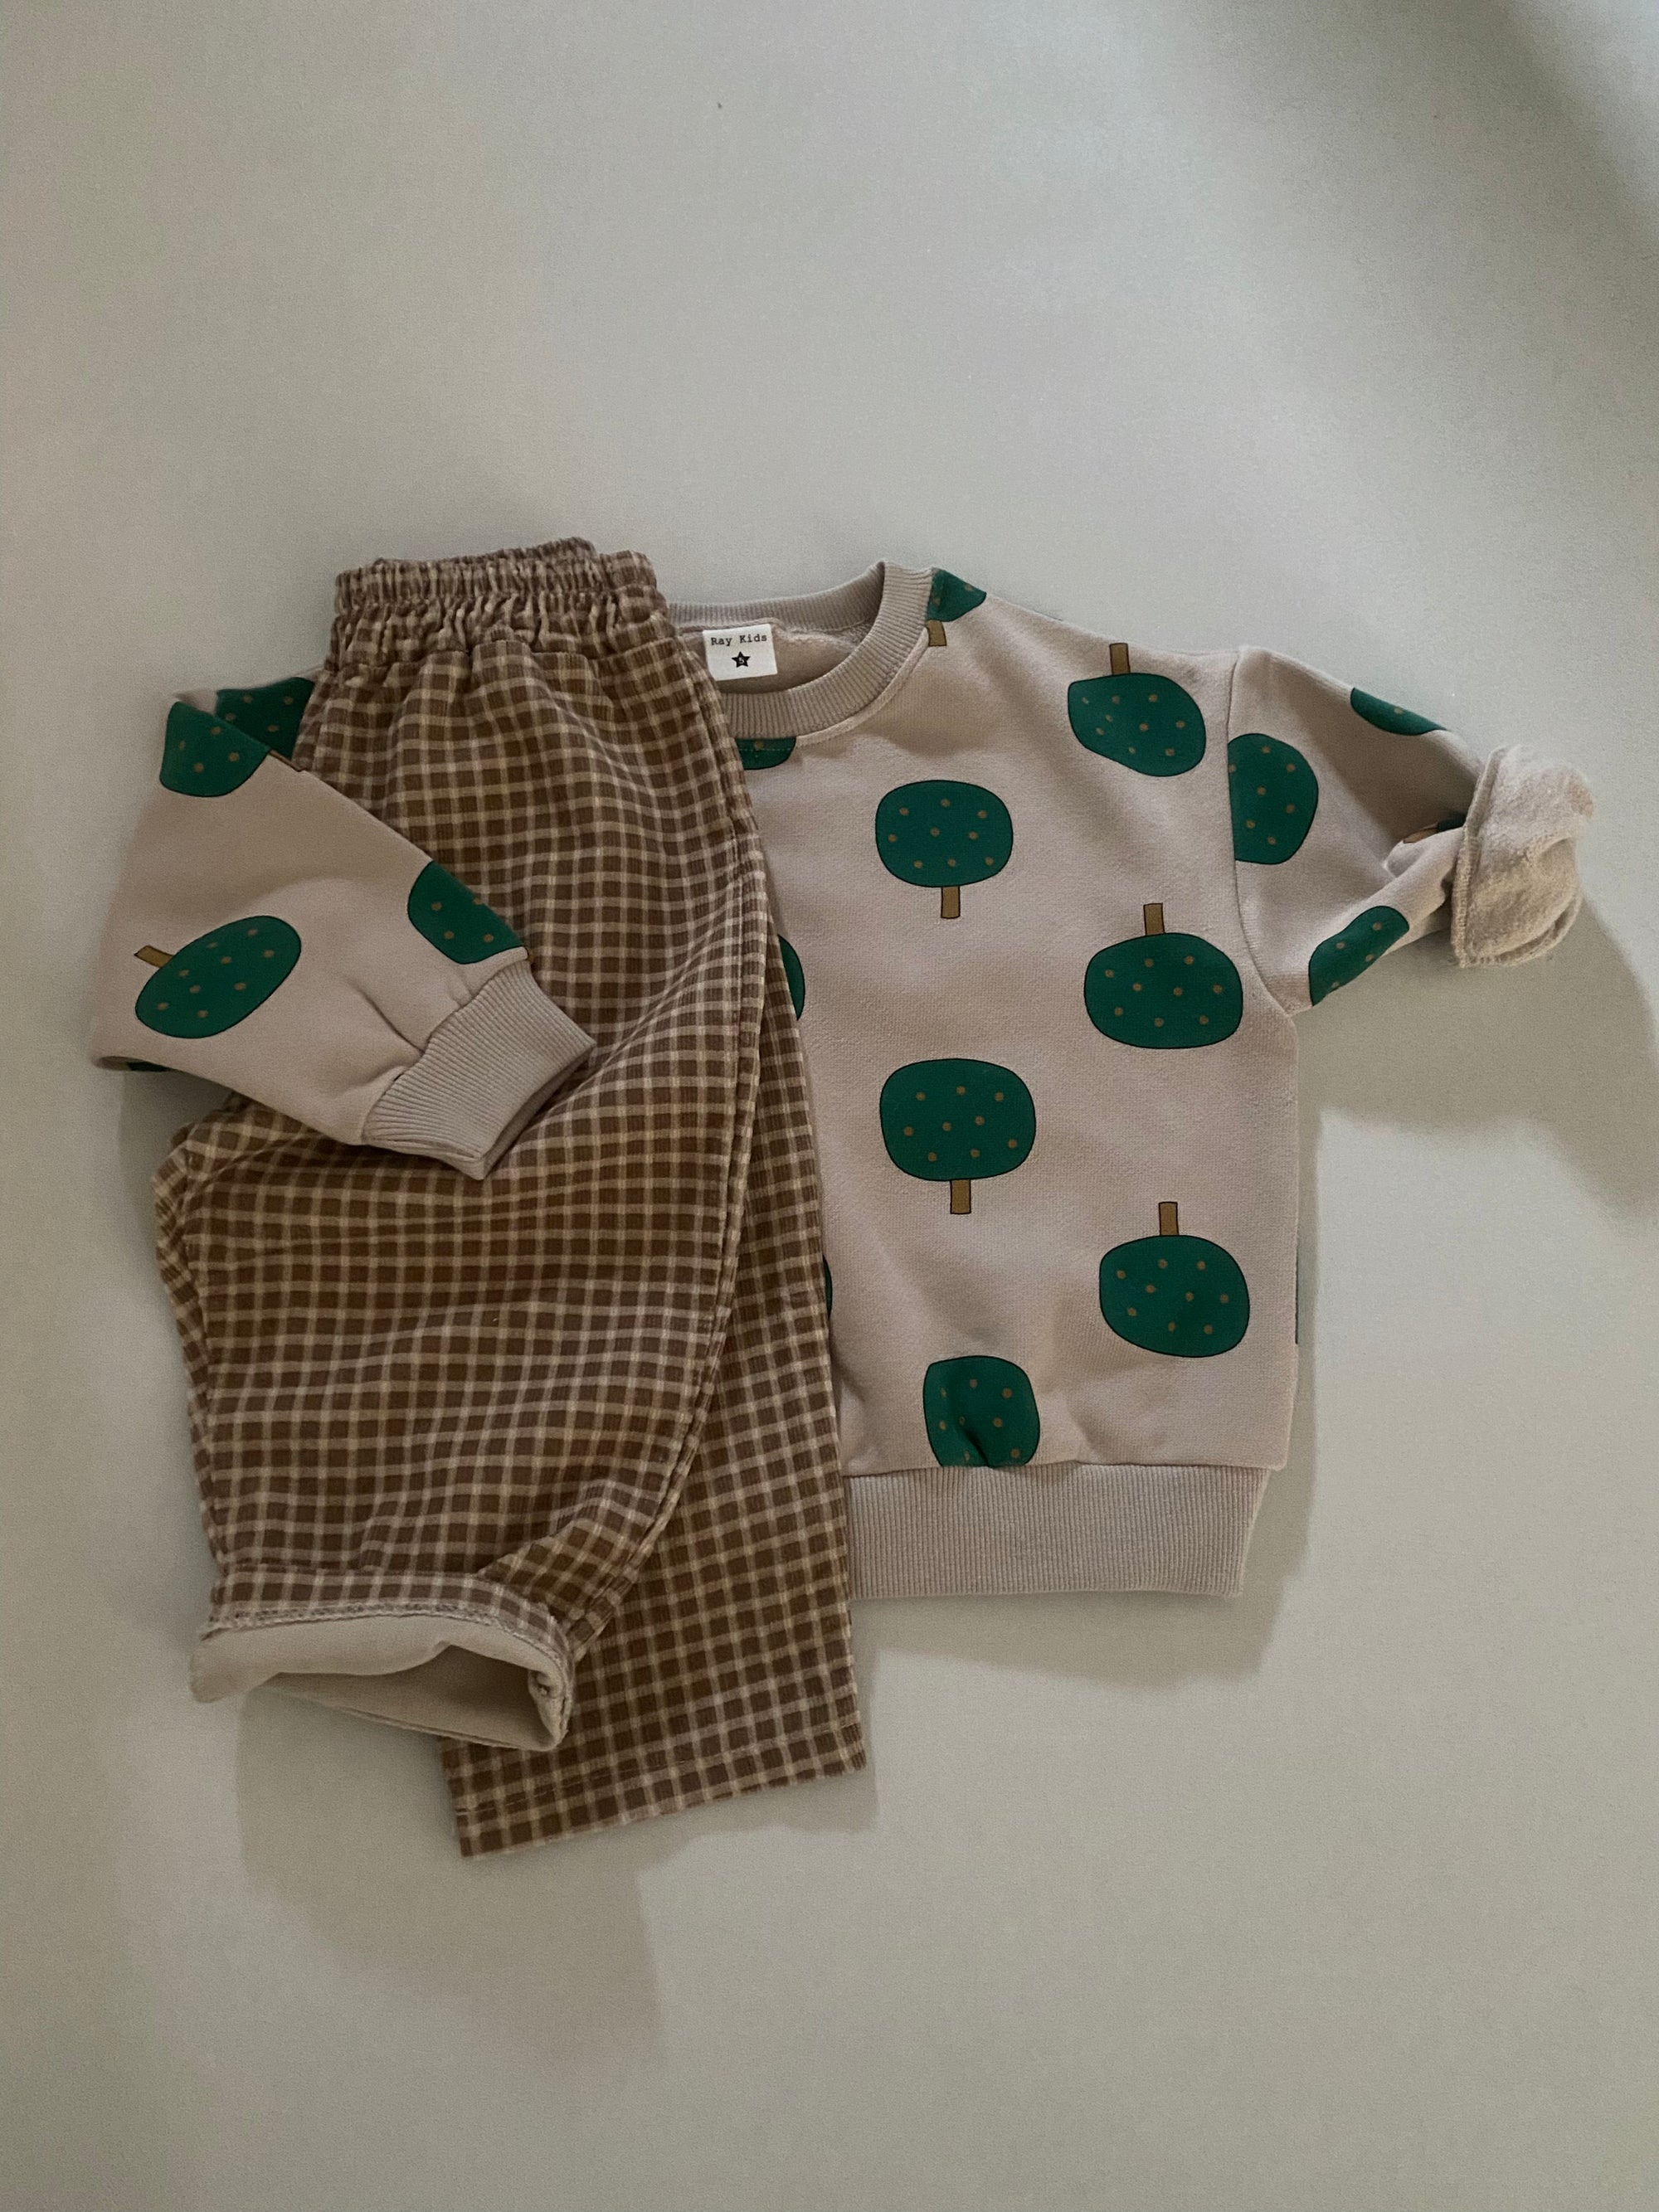 Corduroy Check Pants find Stylish Fashion for Little People- at Little Foxx Concept Store